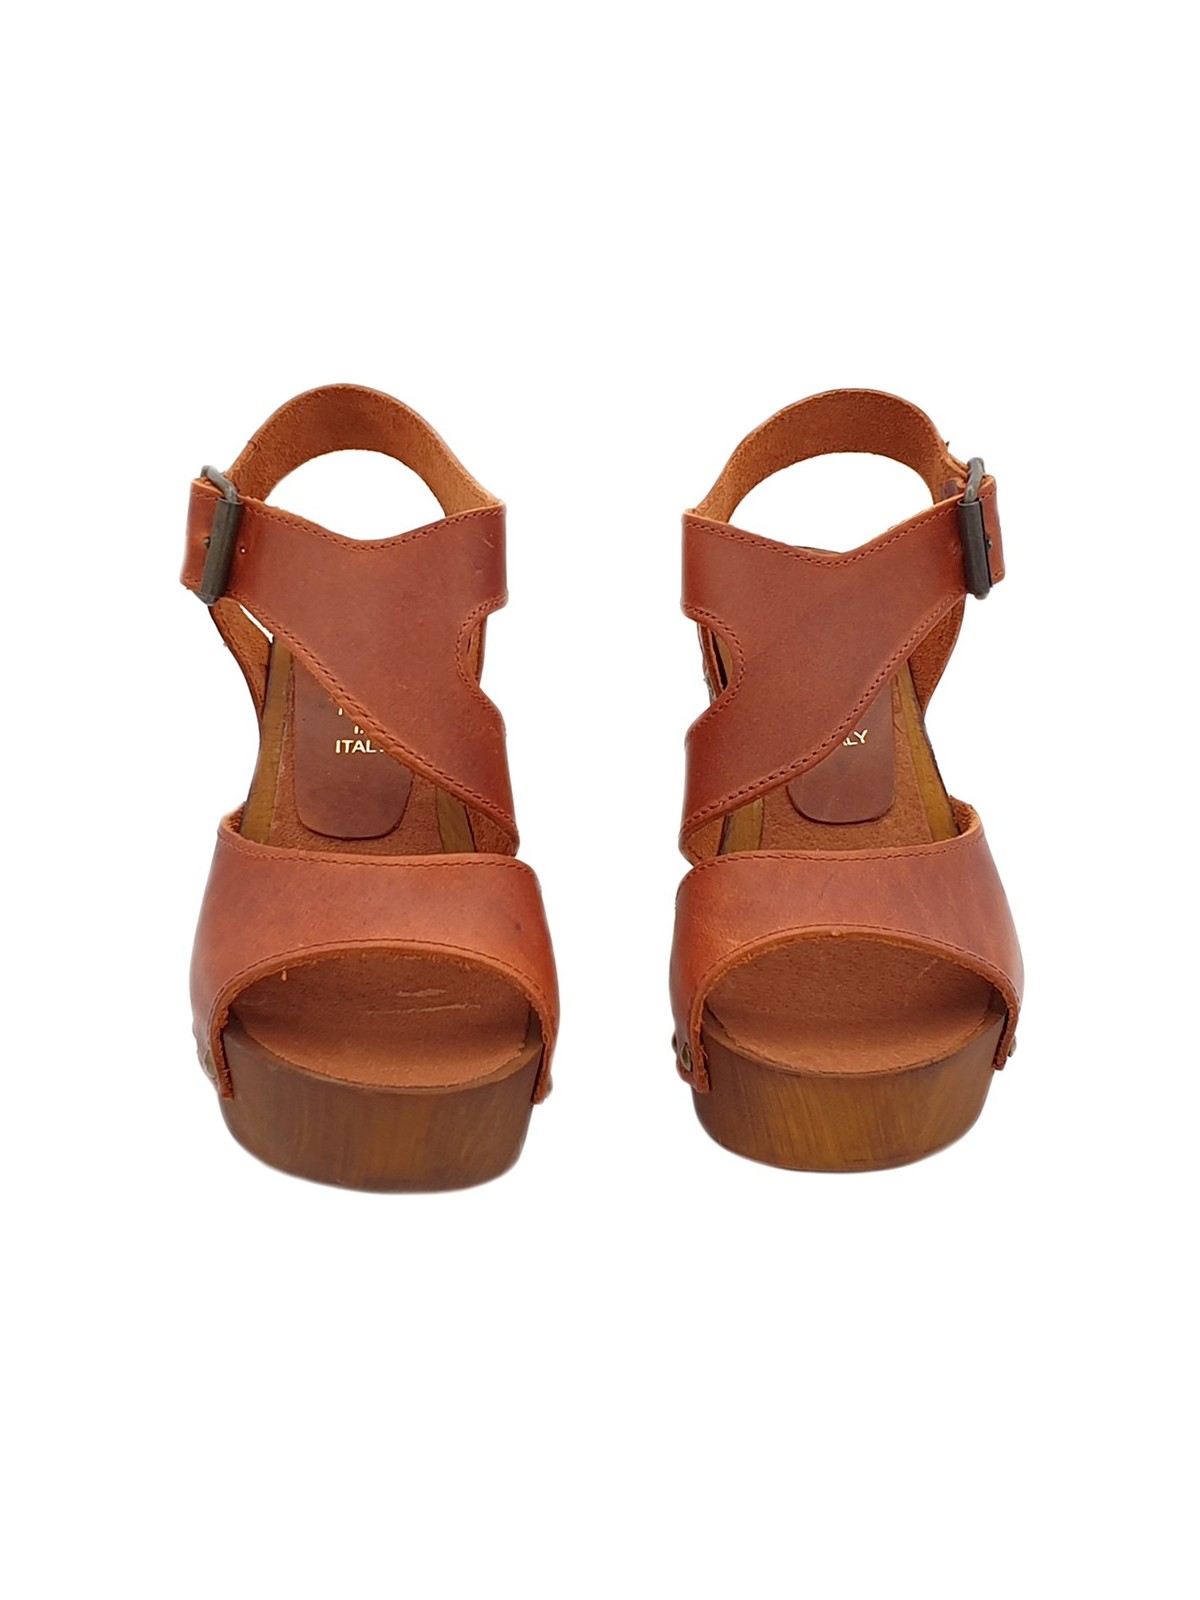 BROWN CLOGS IN LEATHER AND COMFY HEEL 9